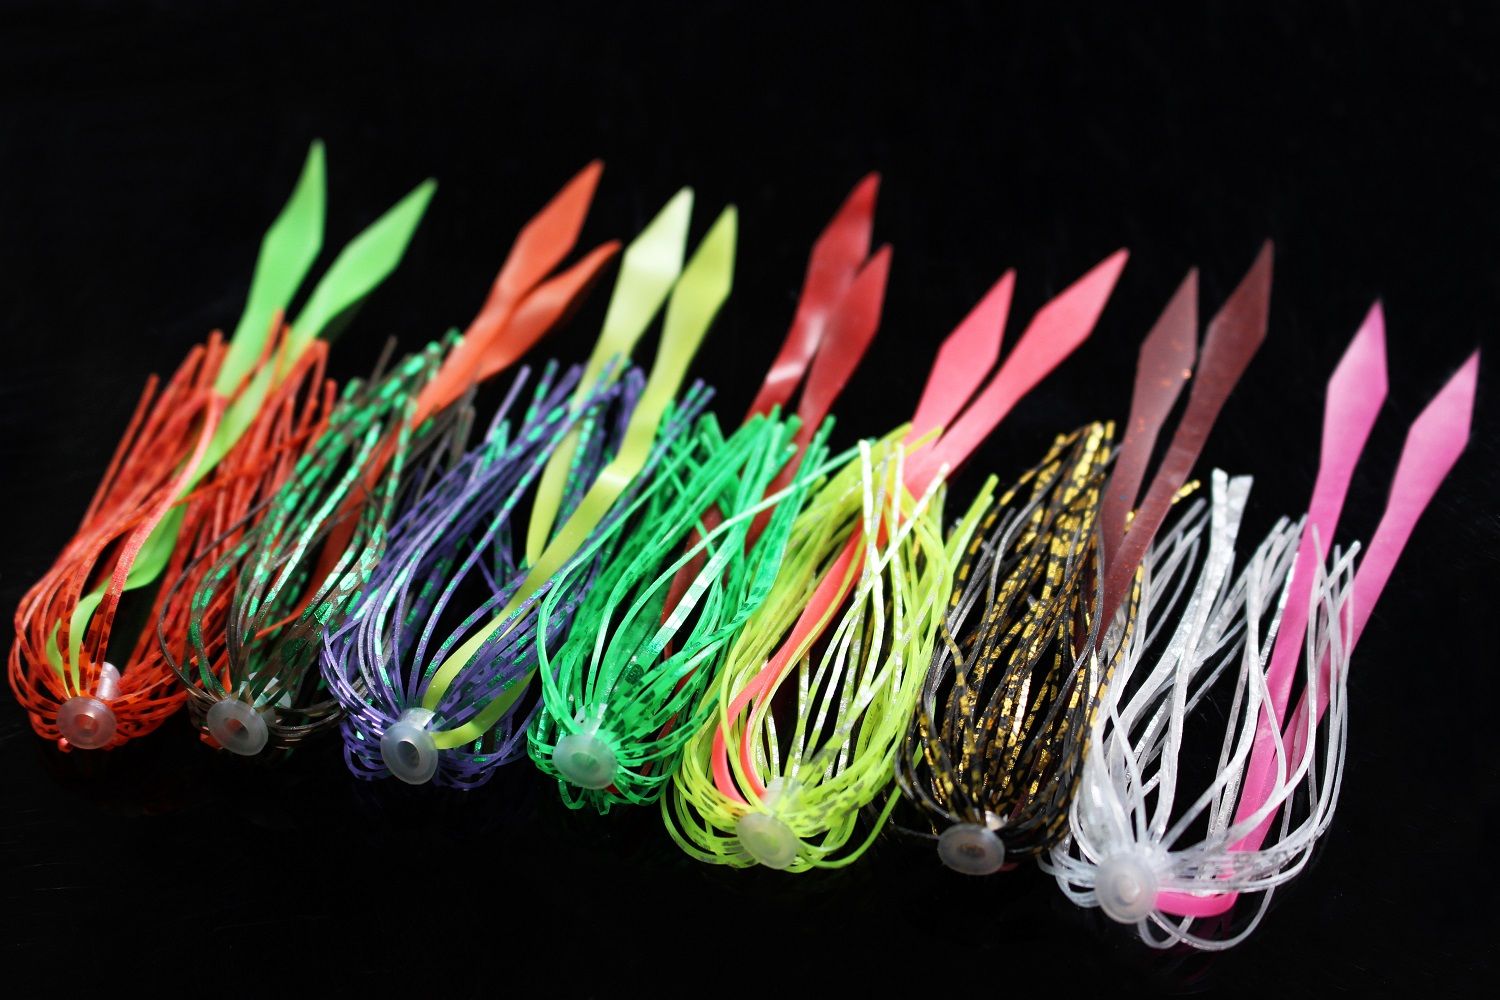 3 pcs 3 colors Silicone Skirts SpinnerBait Buzzbait Squid Rubber Jig Lure Baits Fishing Lures Accessories 